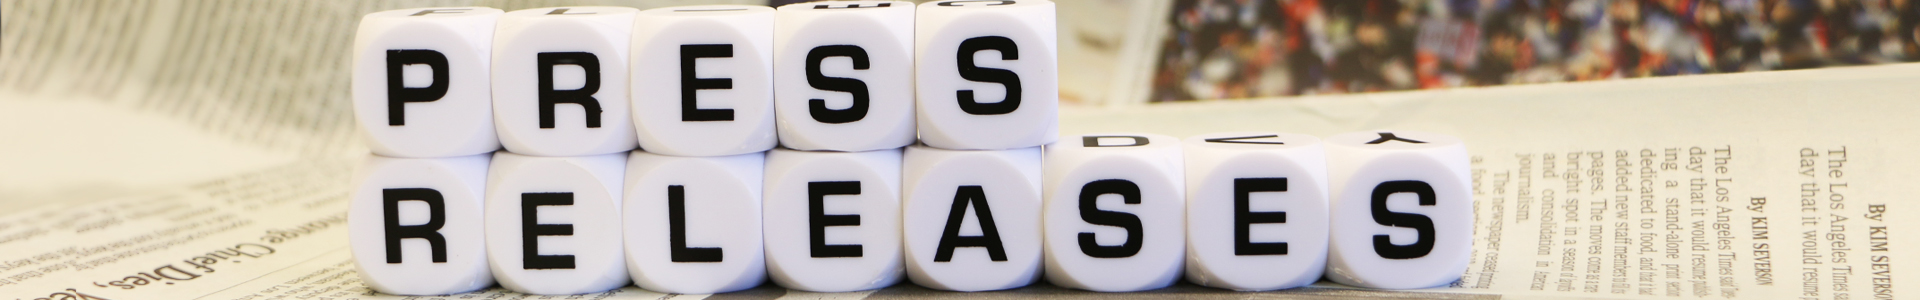 cubes with press release letters on top